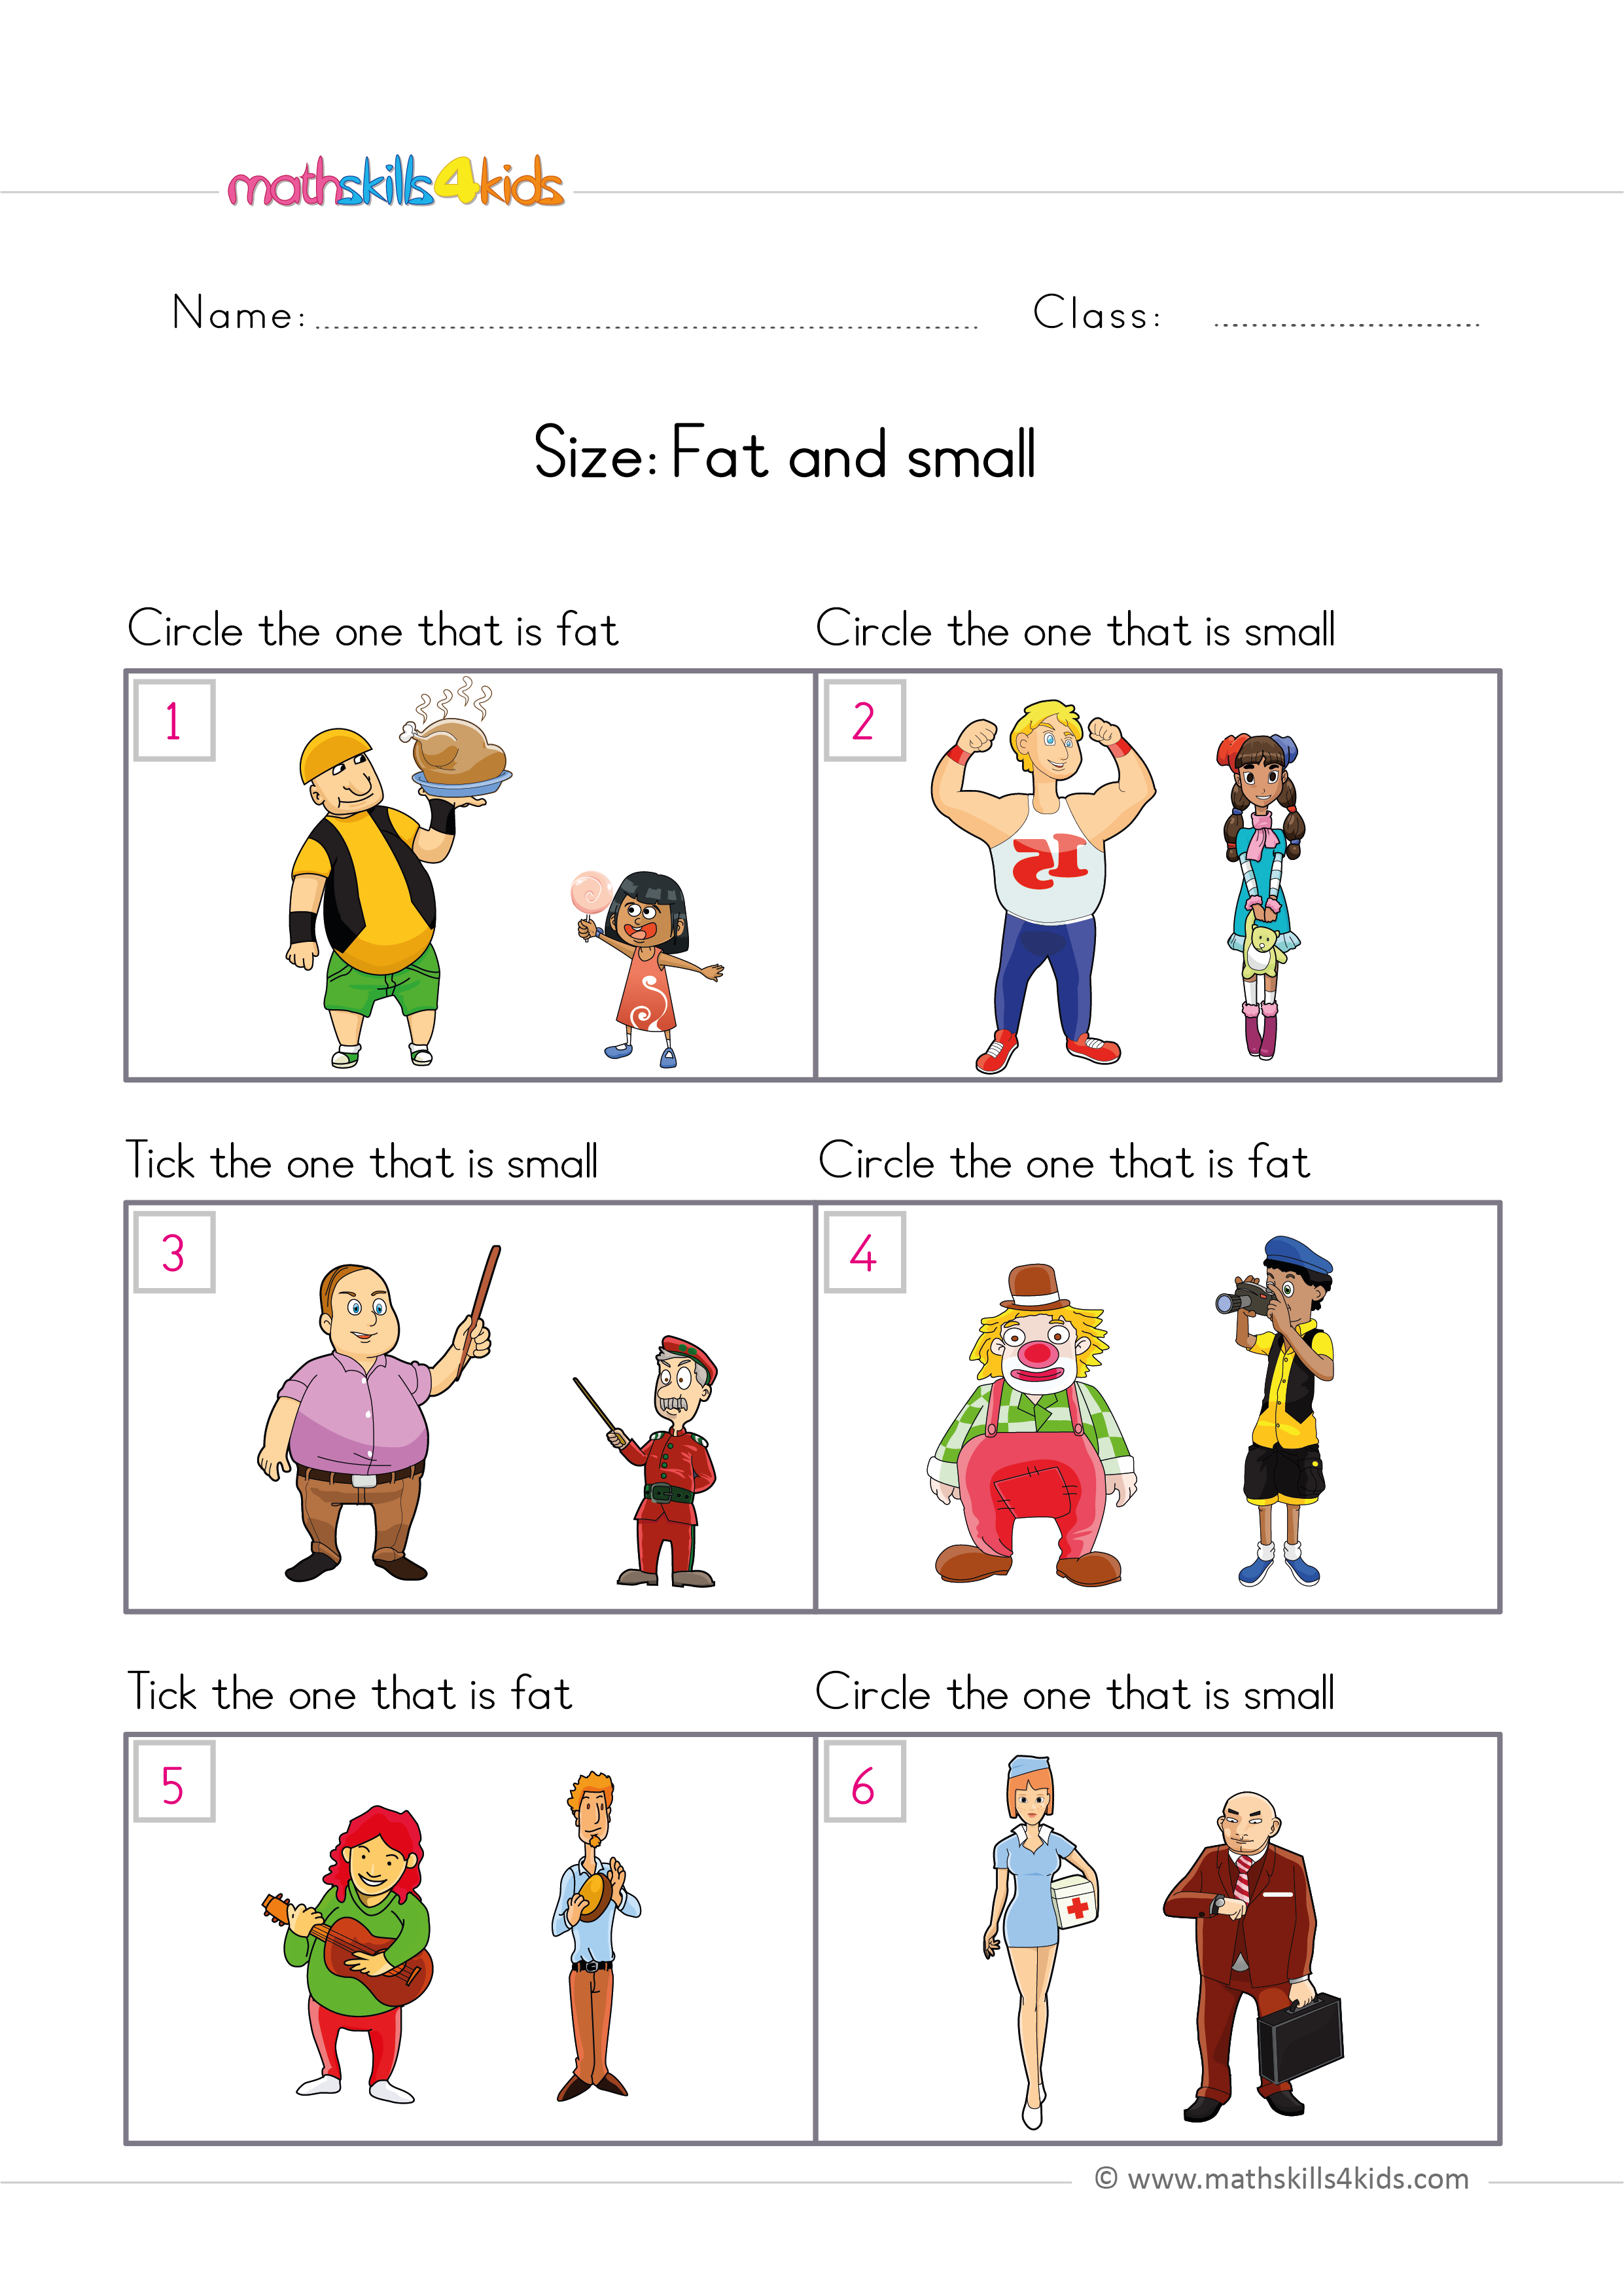 preschool math worksheets size comparing fat and small